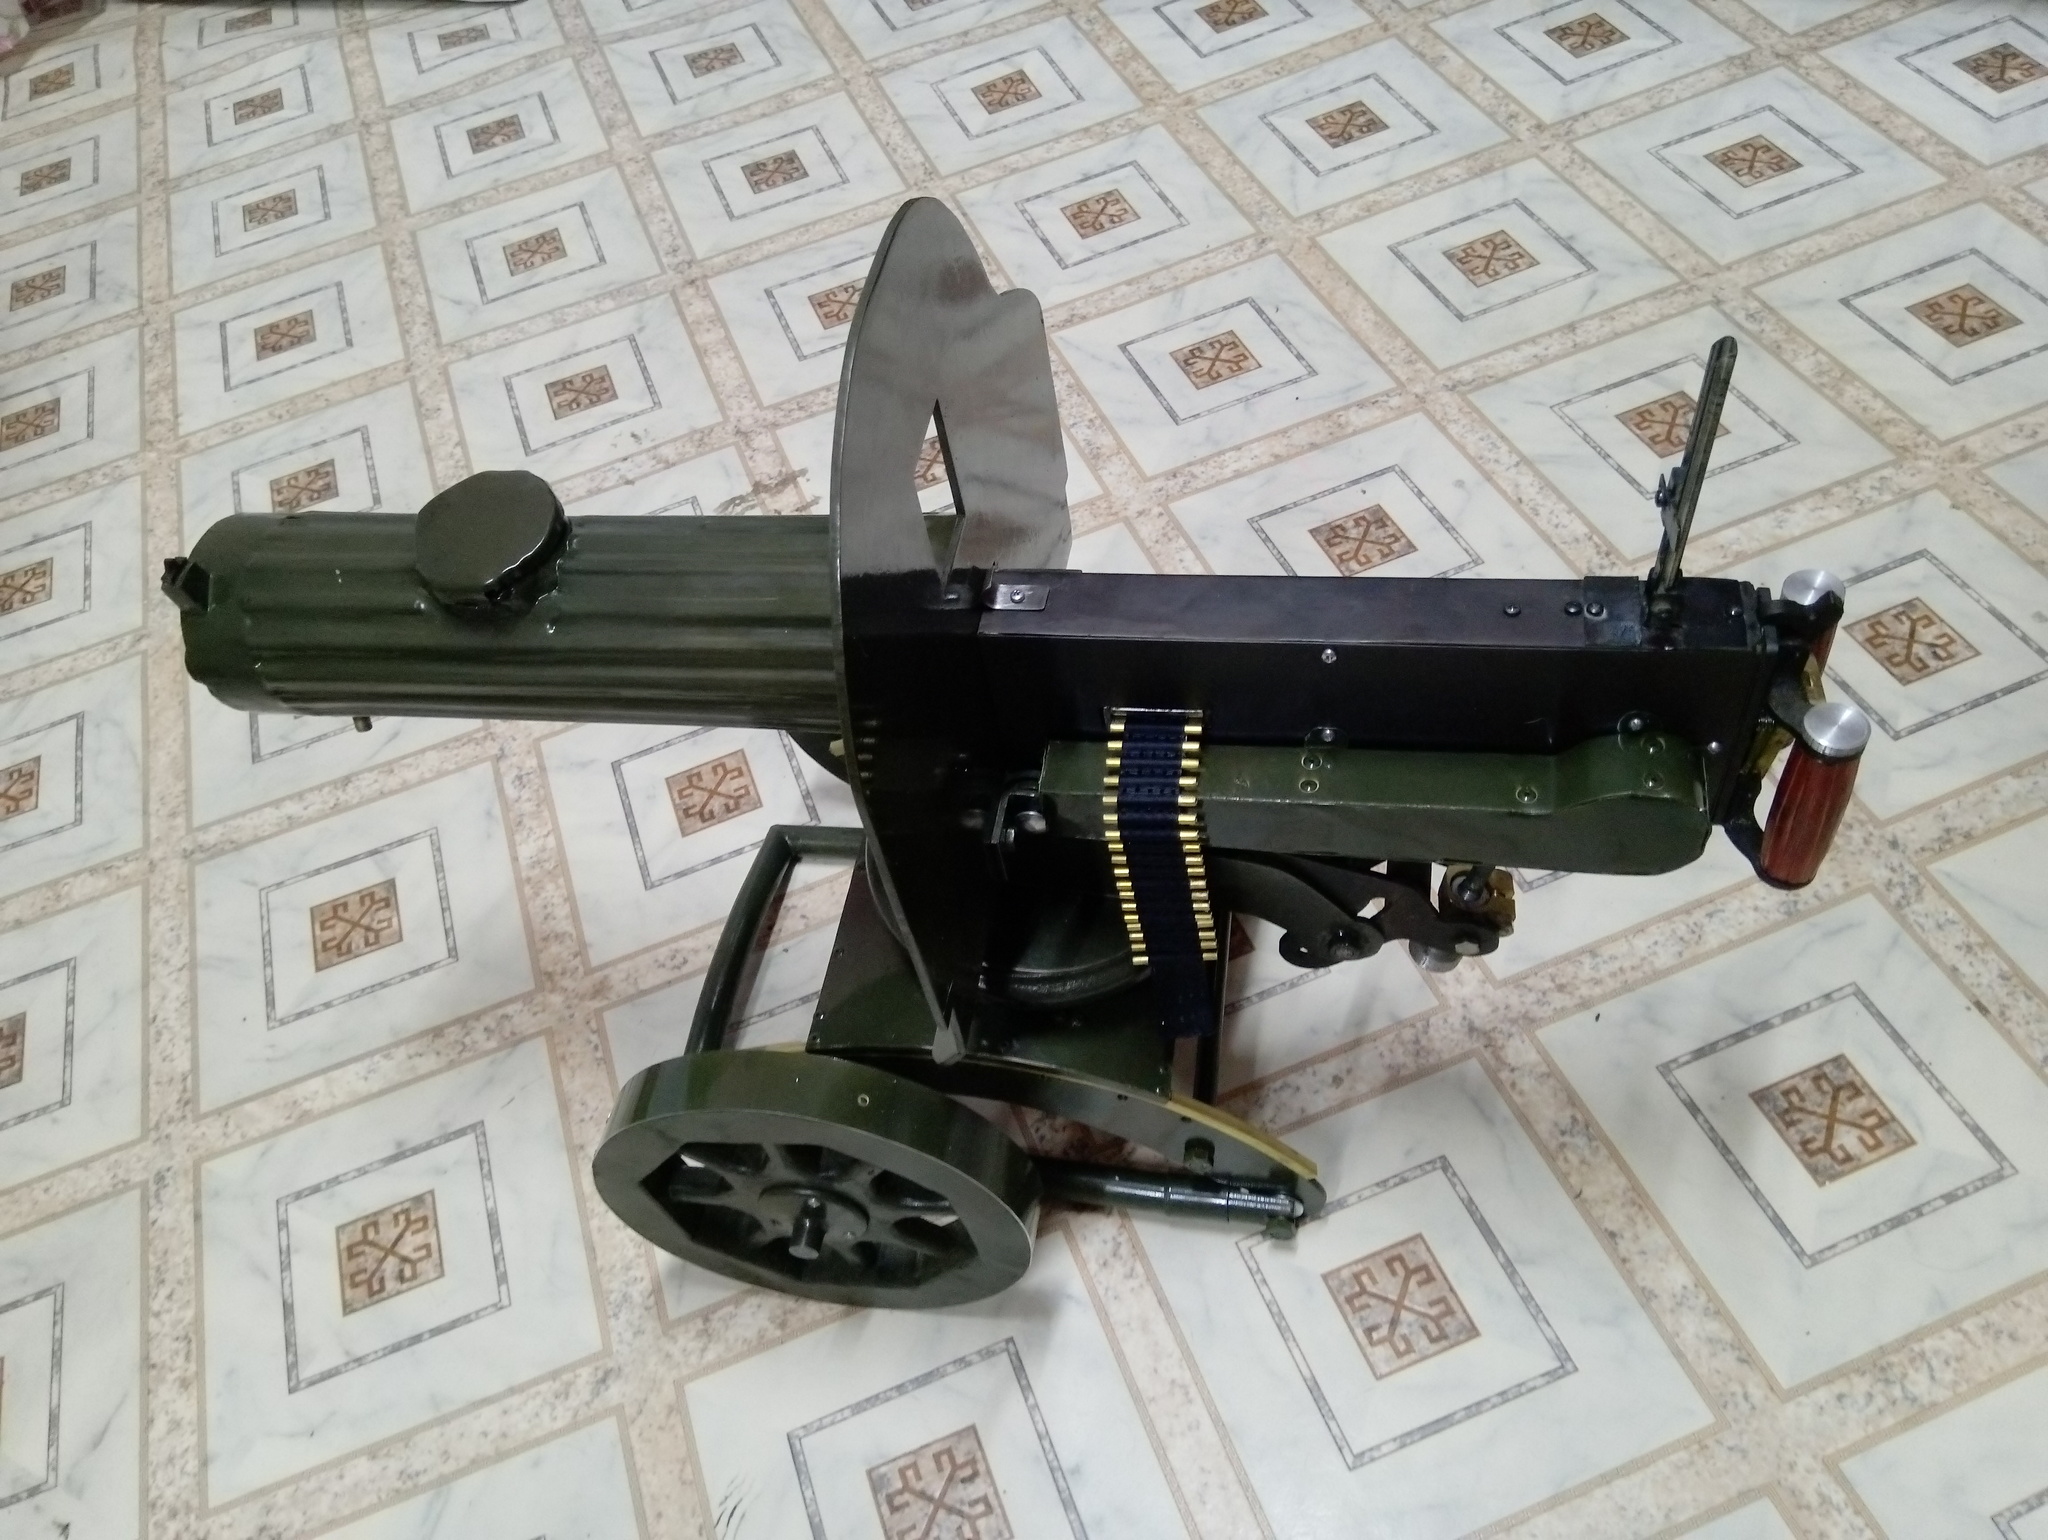 Machine gun Maxim pneumatic, model 1 to 1.5 - My, Needlework with process, Needlework, With your own hands, Models, Pneumatics, Airguns, Maxim machine gun, Homemade, Video, Longpost